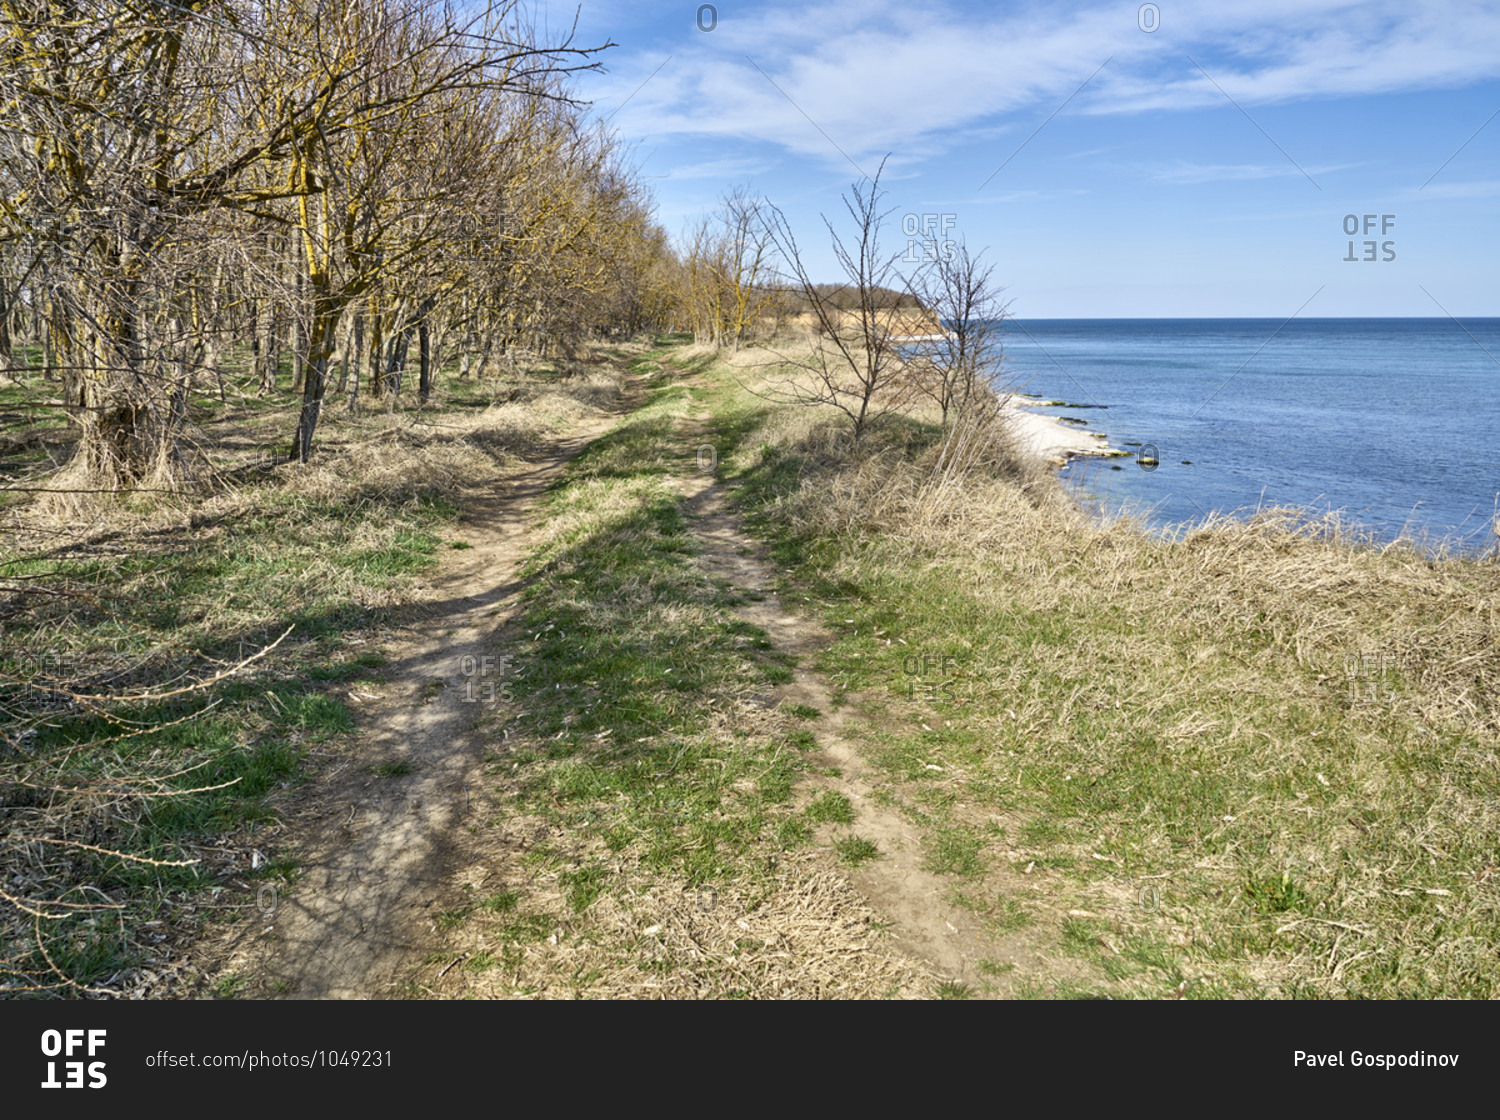 To the northeast of the village of Durankulak is the Anna Maria beach that continues up to Sivriburun and the Bulgaria-Romania border. The beach is wide, not crowded.